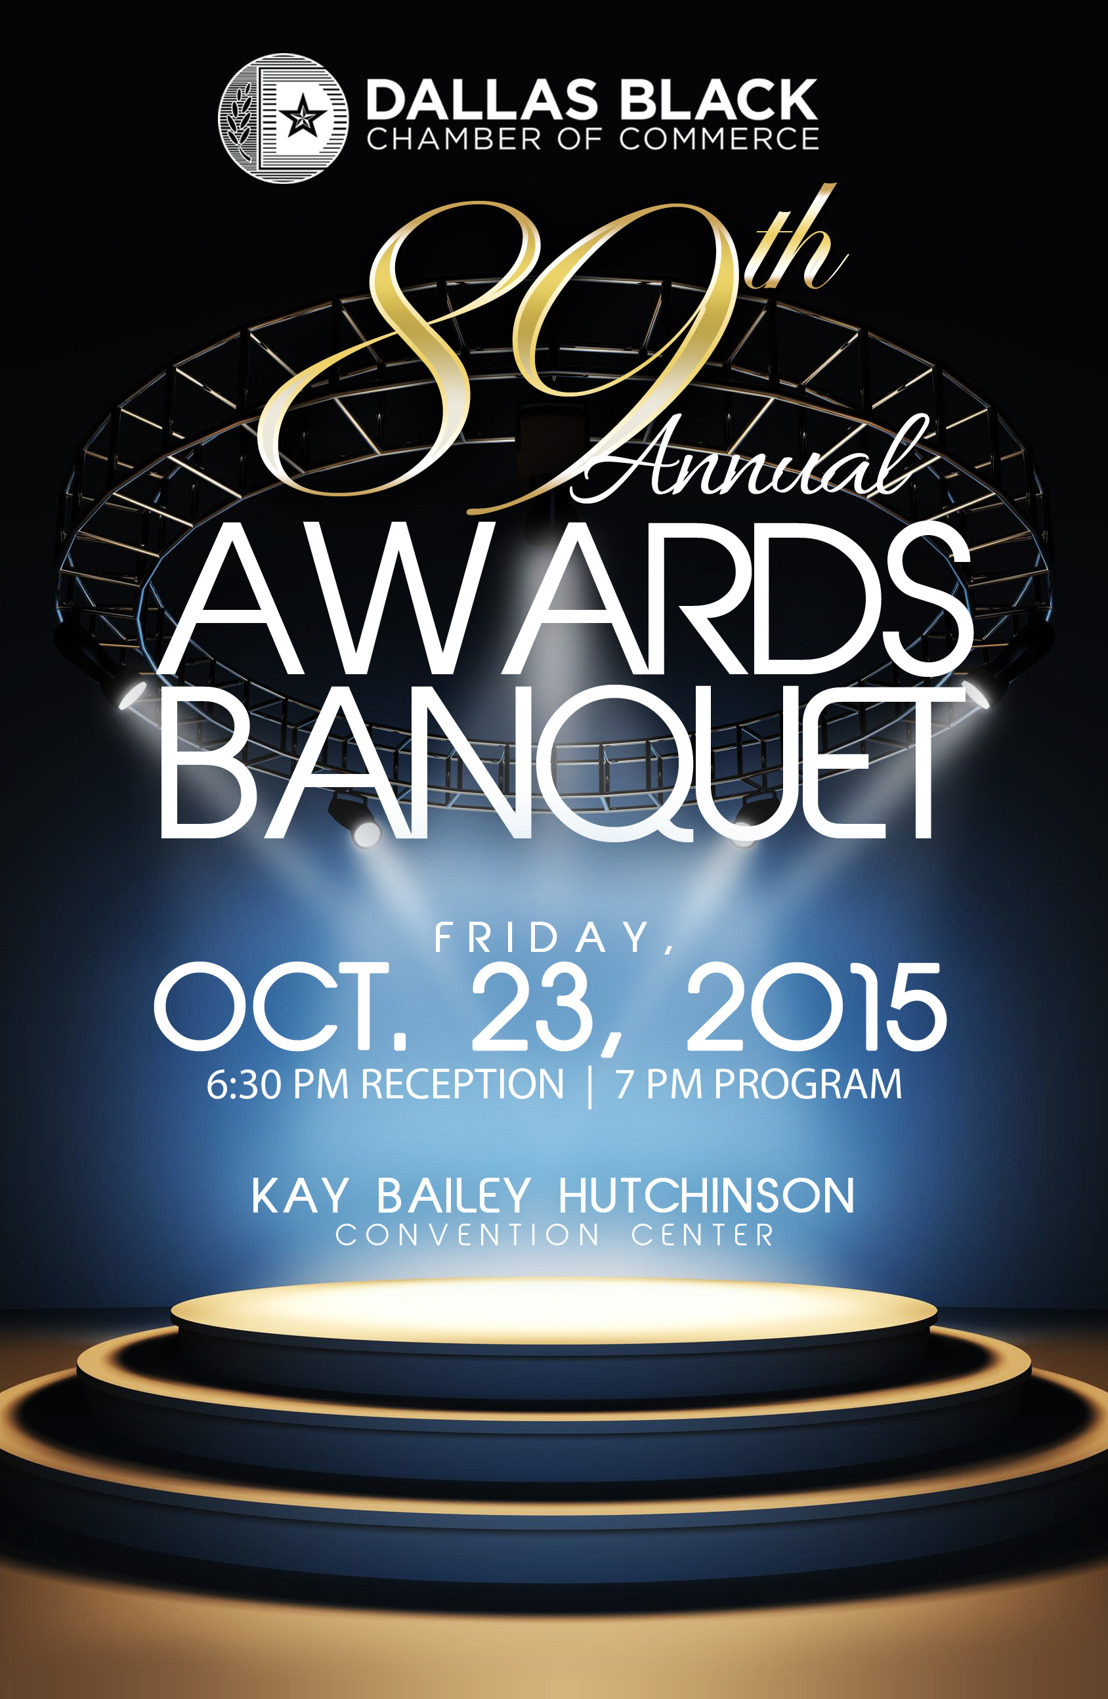 Dallas Black Chamber of Commerce Host the 89th Annual Awards Banquet 